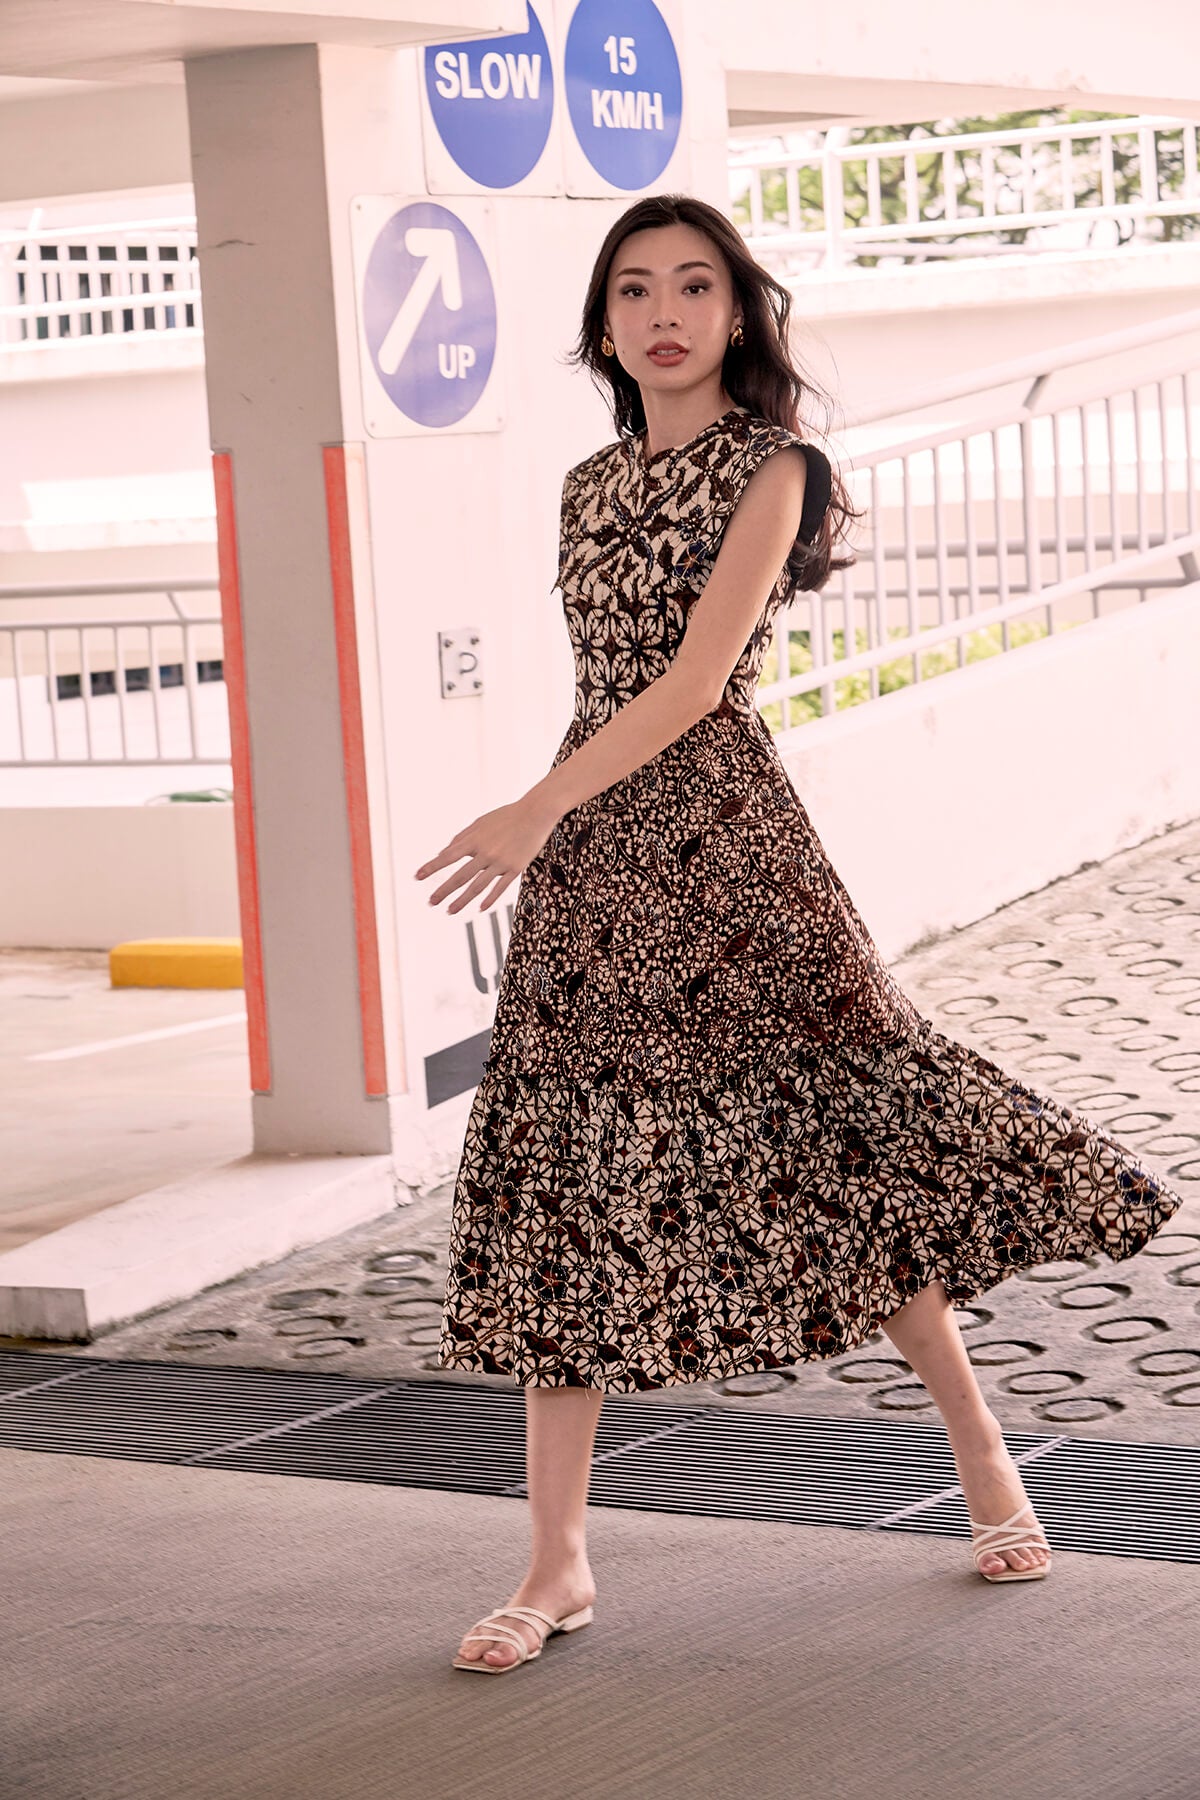 Chinese model taking a long stride at a carpark. She is posing for a picture wearing a brown batik dress, in mid calf length and flared skirt. She has her left arm in front of her. She has long wavy hair.